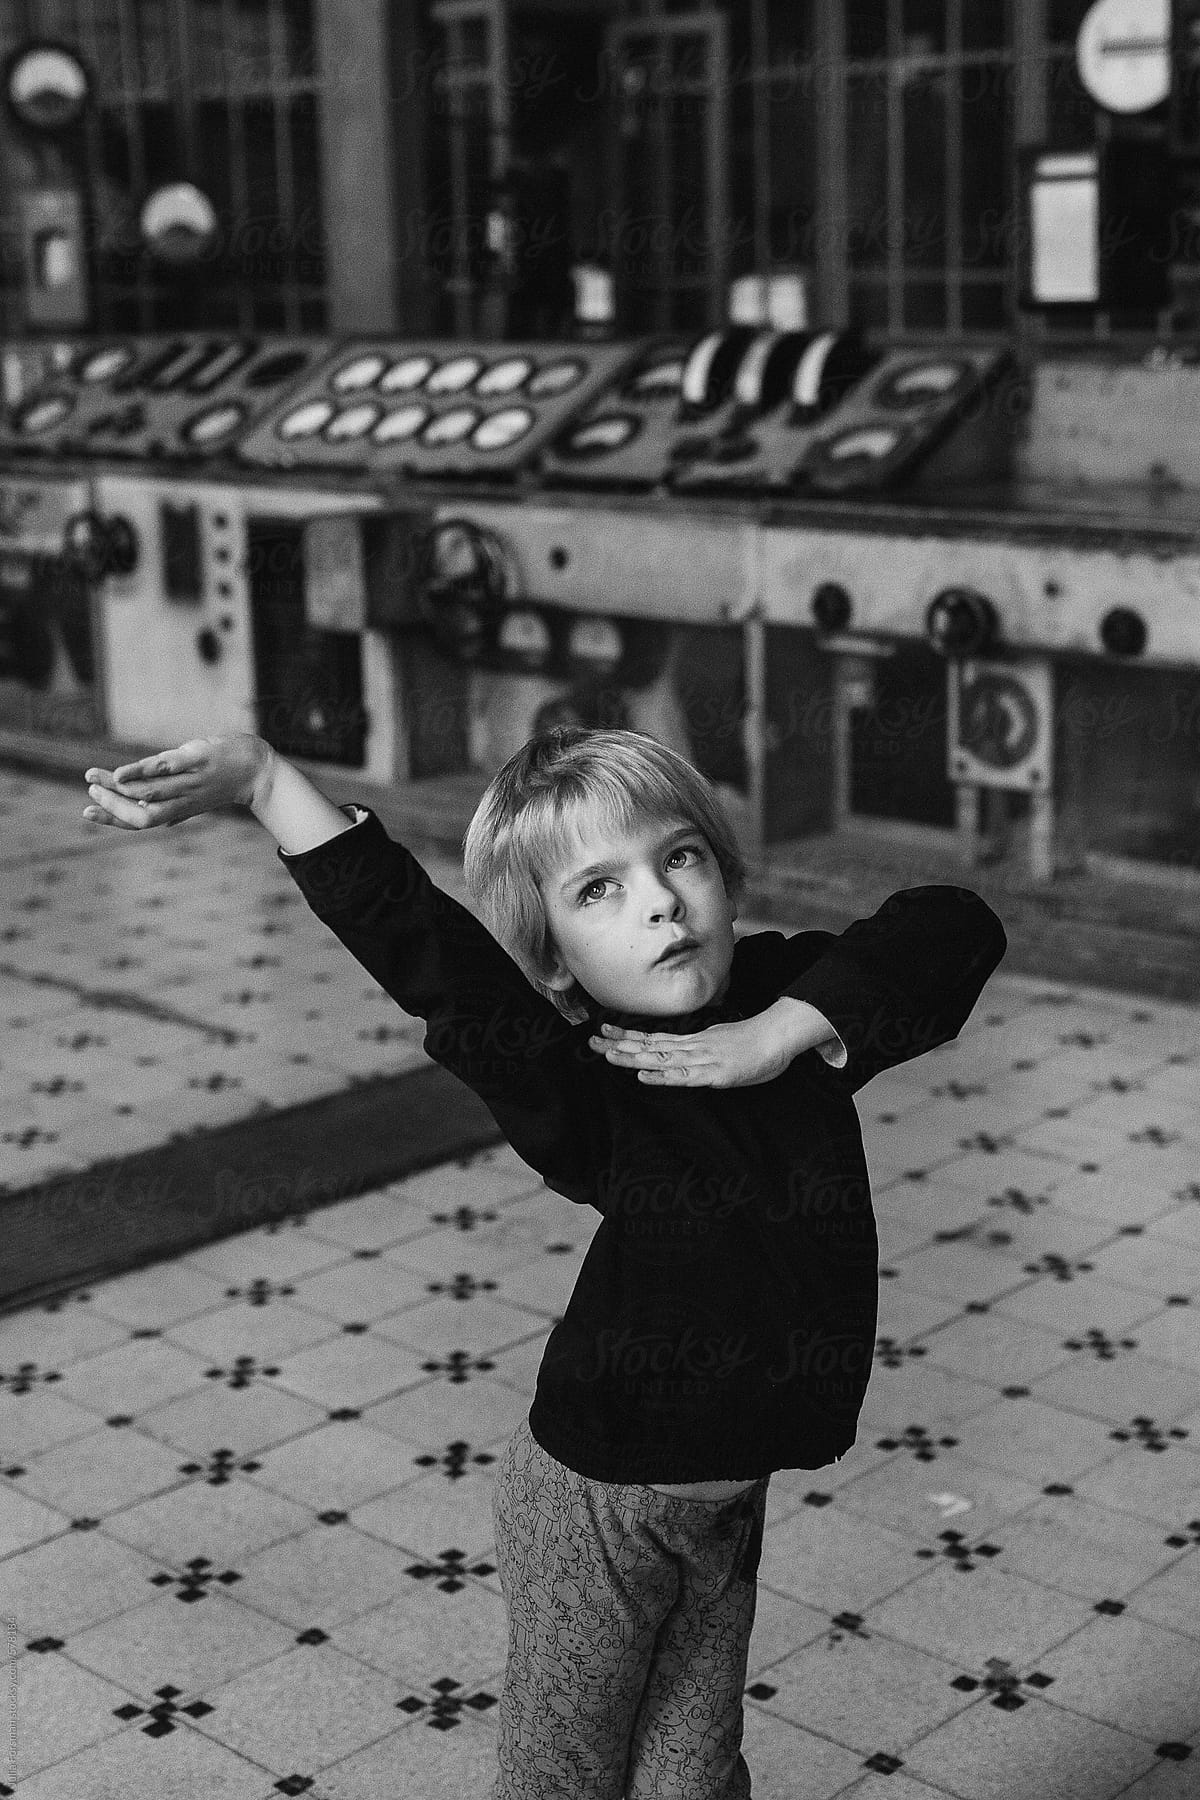 A cute boy child dances in a disused power station.